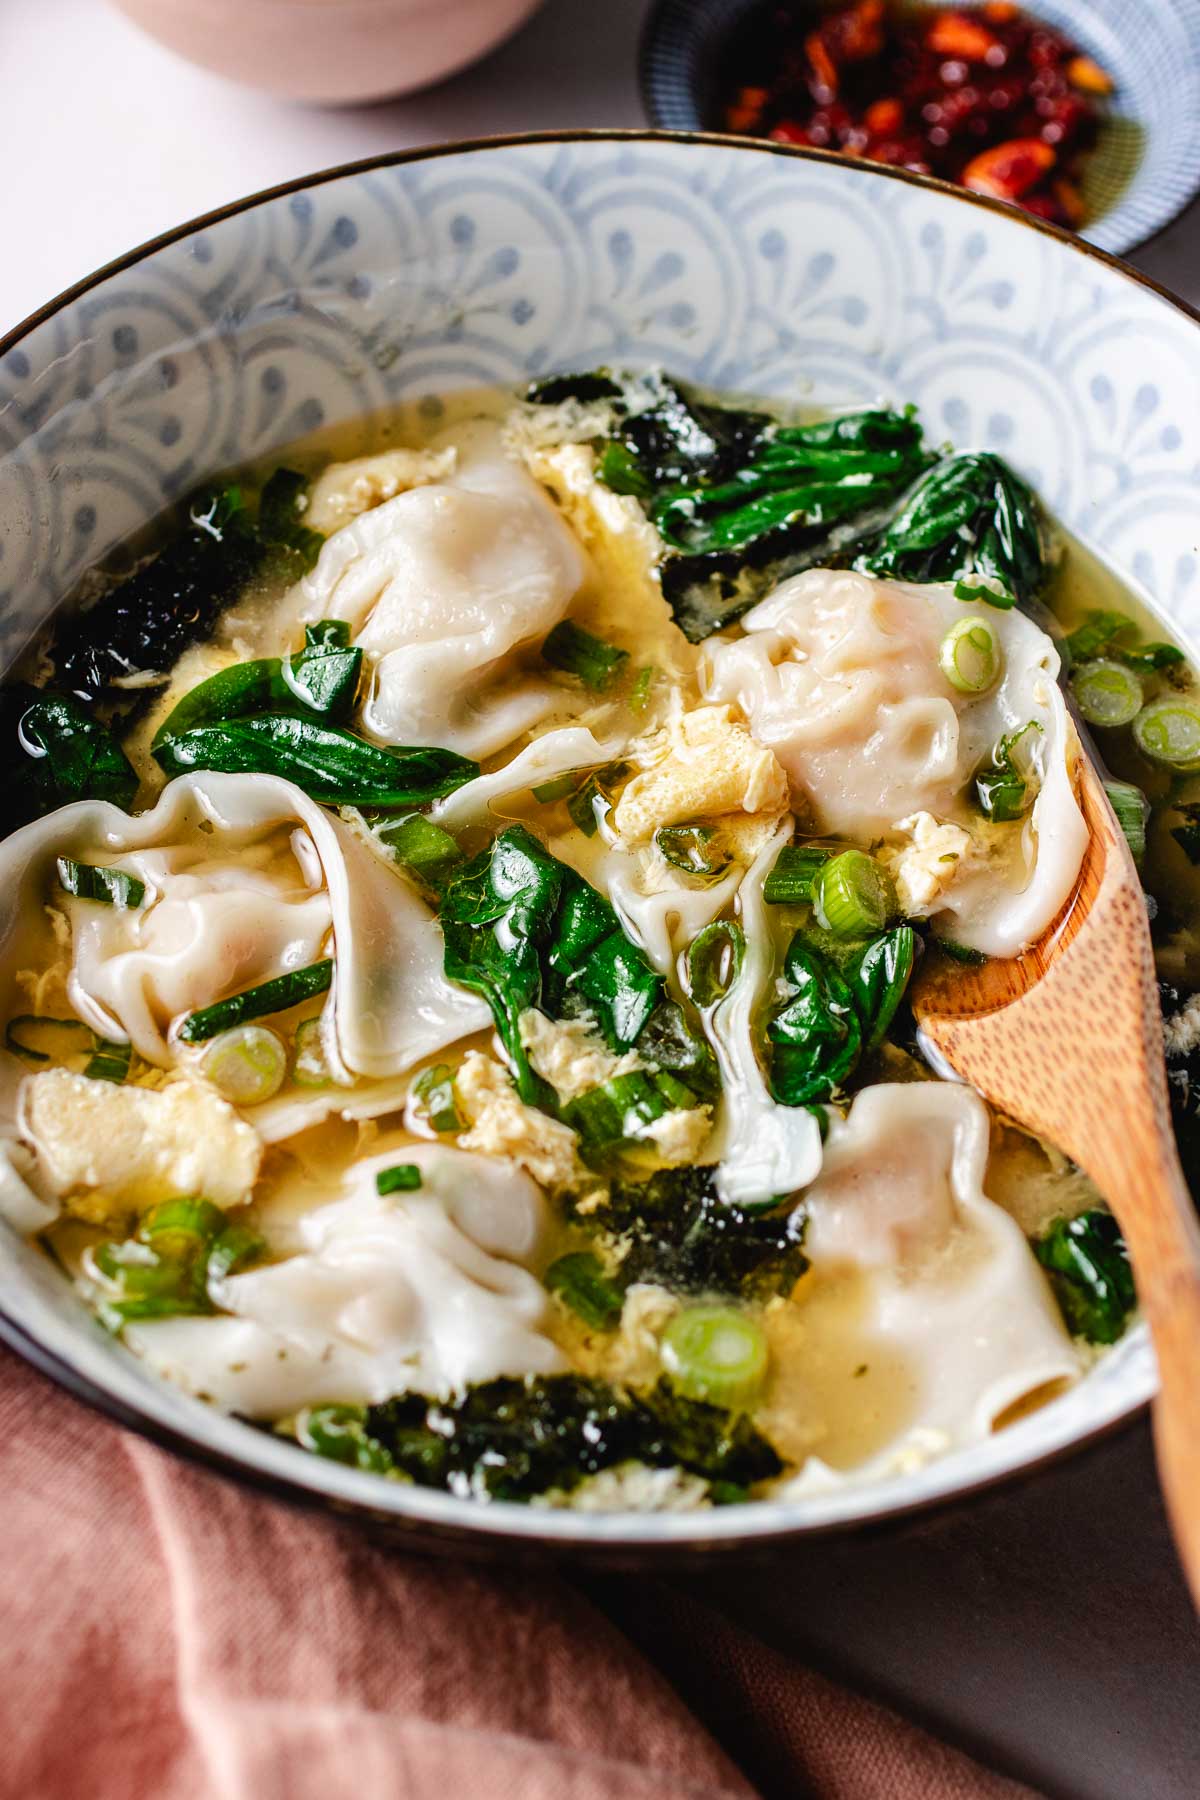 A side close shot image shows soft wontons floating in fluffy egg flower broth with spinach and seaweed in the broth.